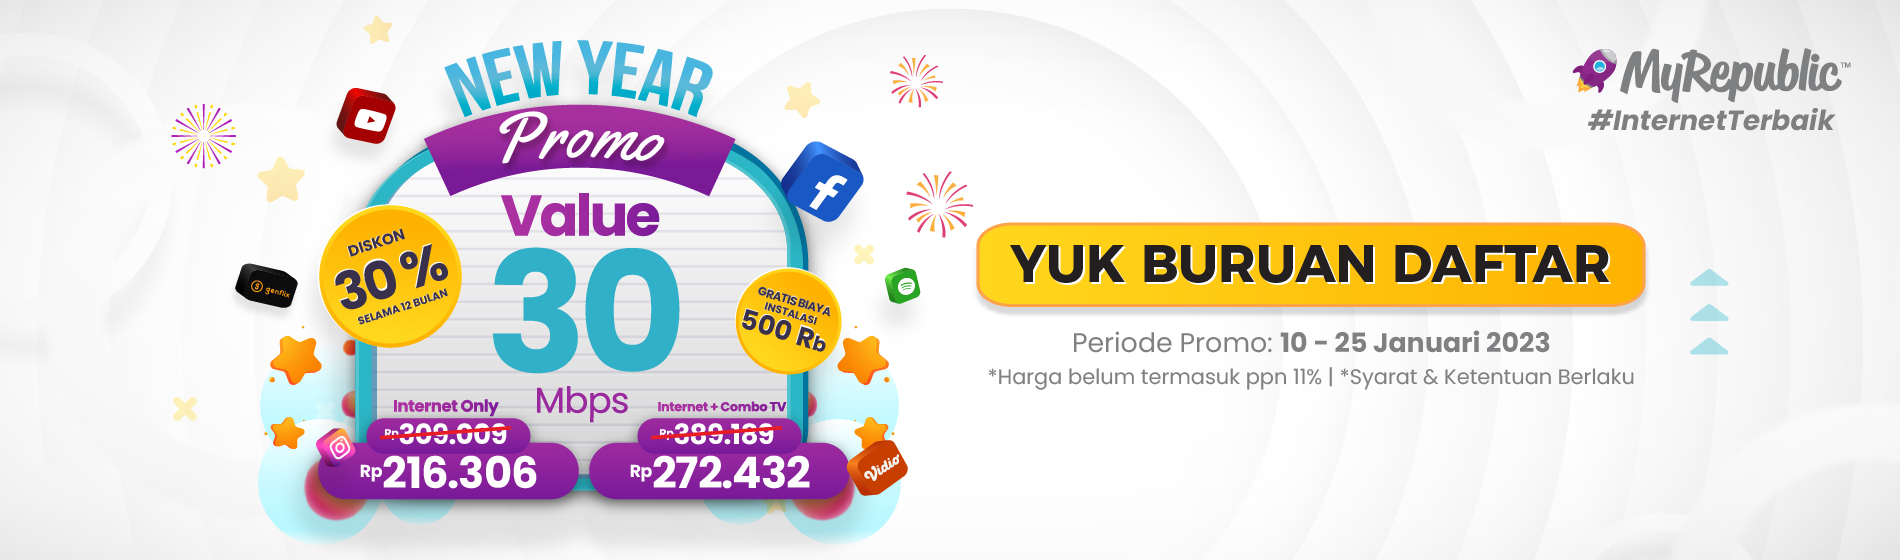 Promo New Year, New Value